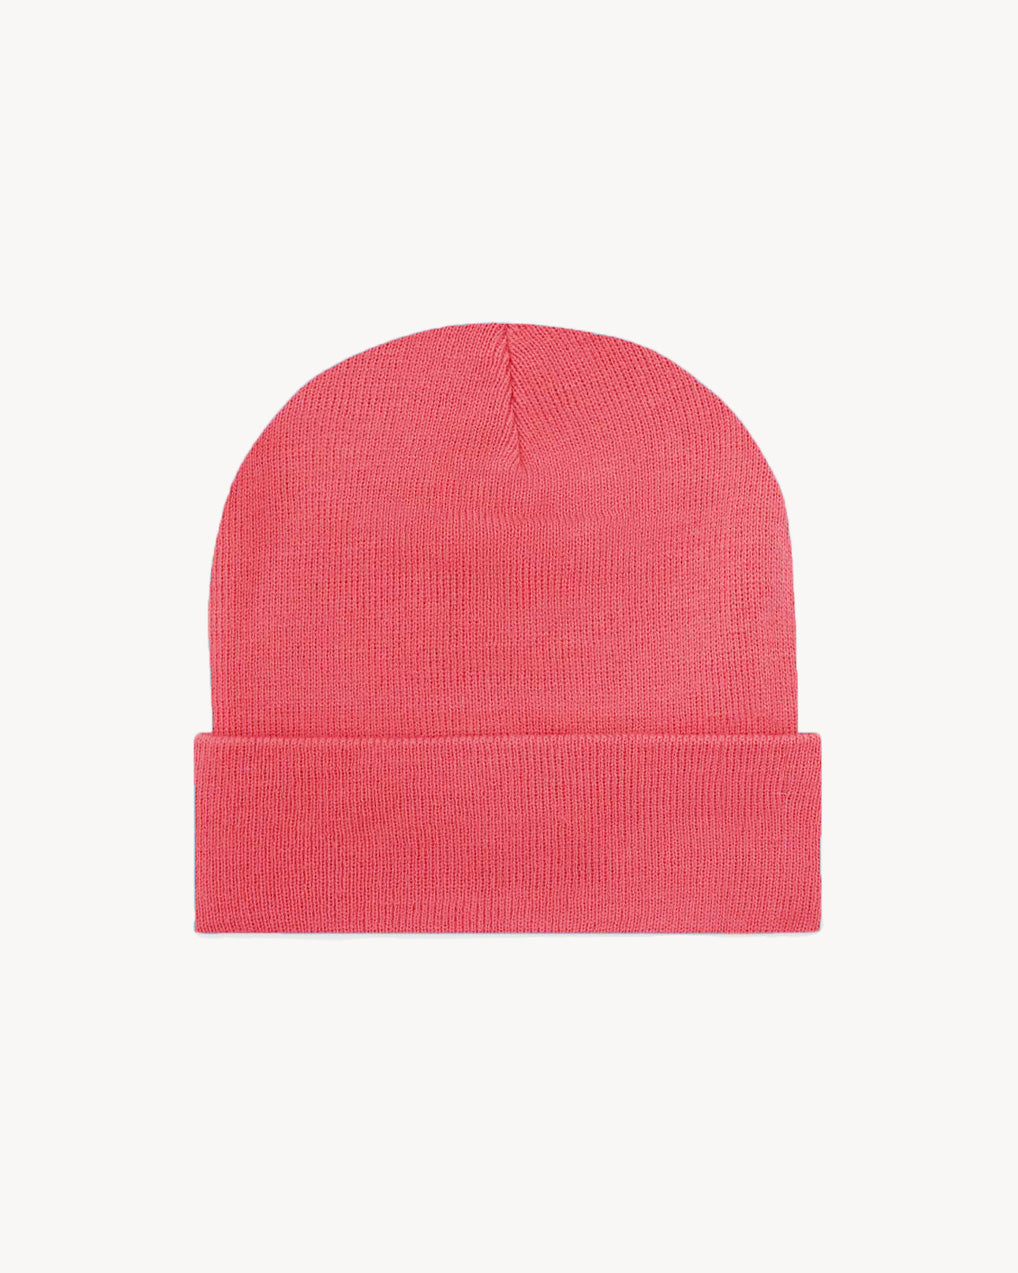 CORAL HAT | CUSTOM EMBROIDERY